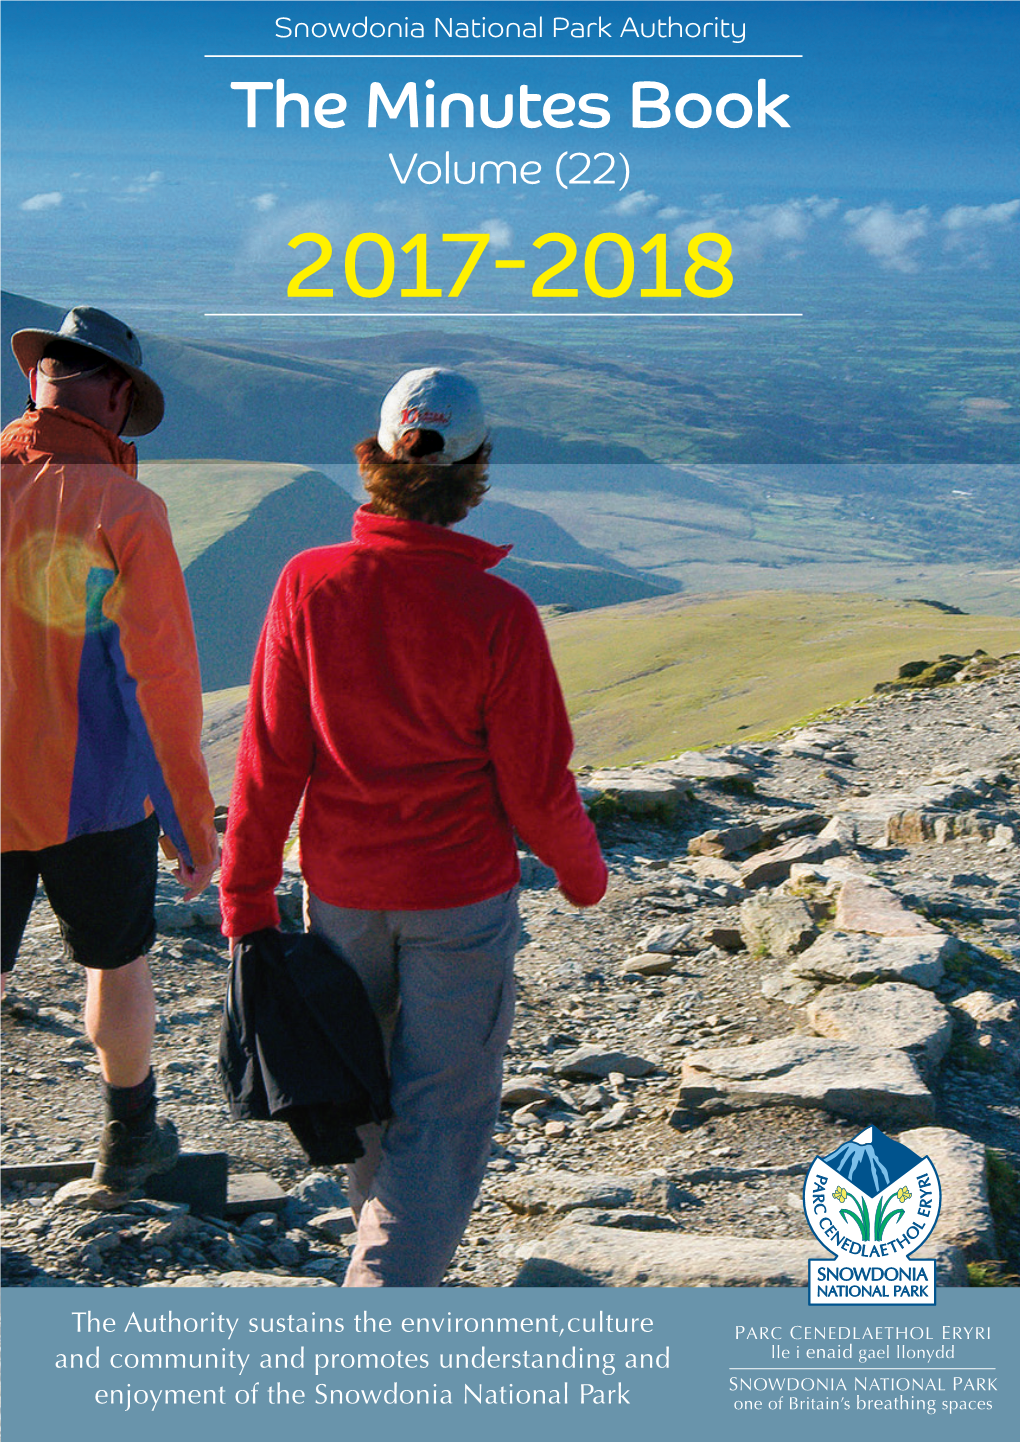 Snowdonia National Park Authority the Minutes Book Volume (22) 2017-2018